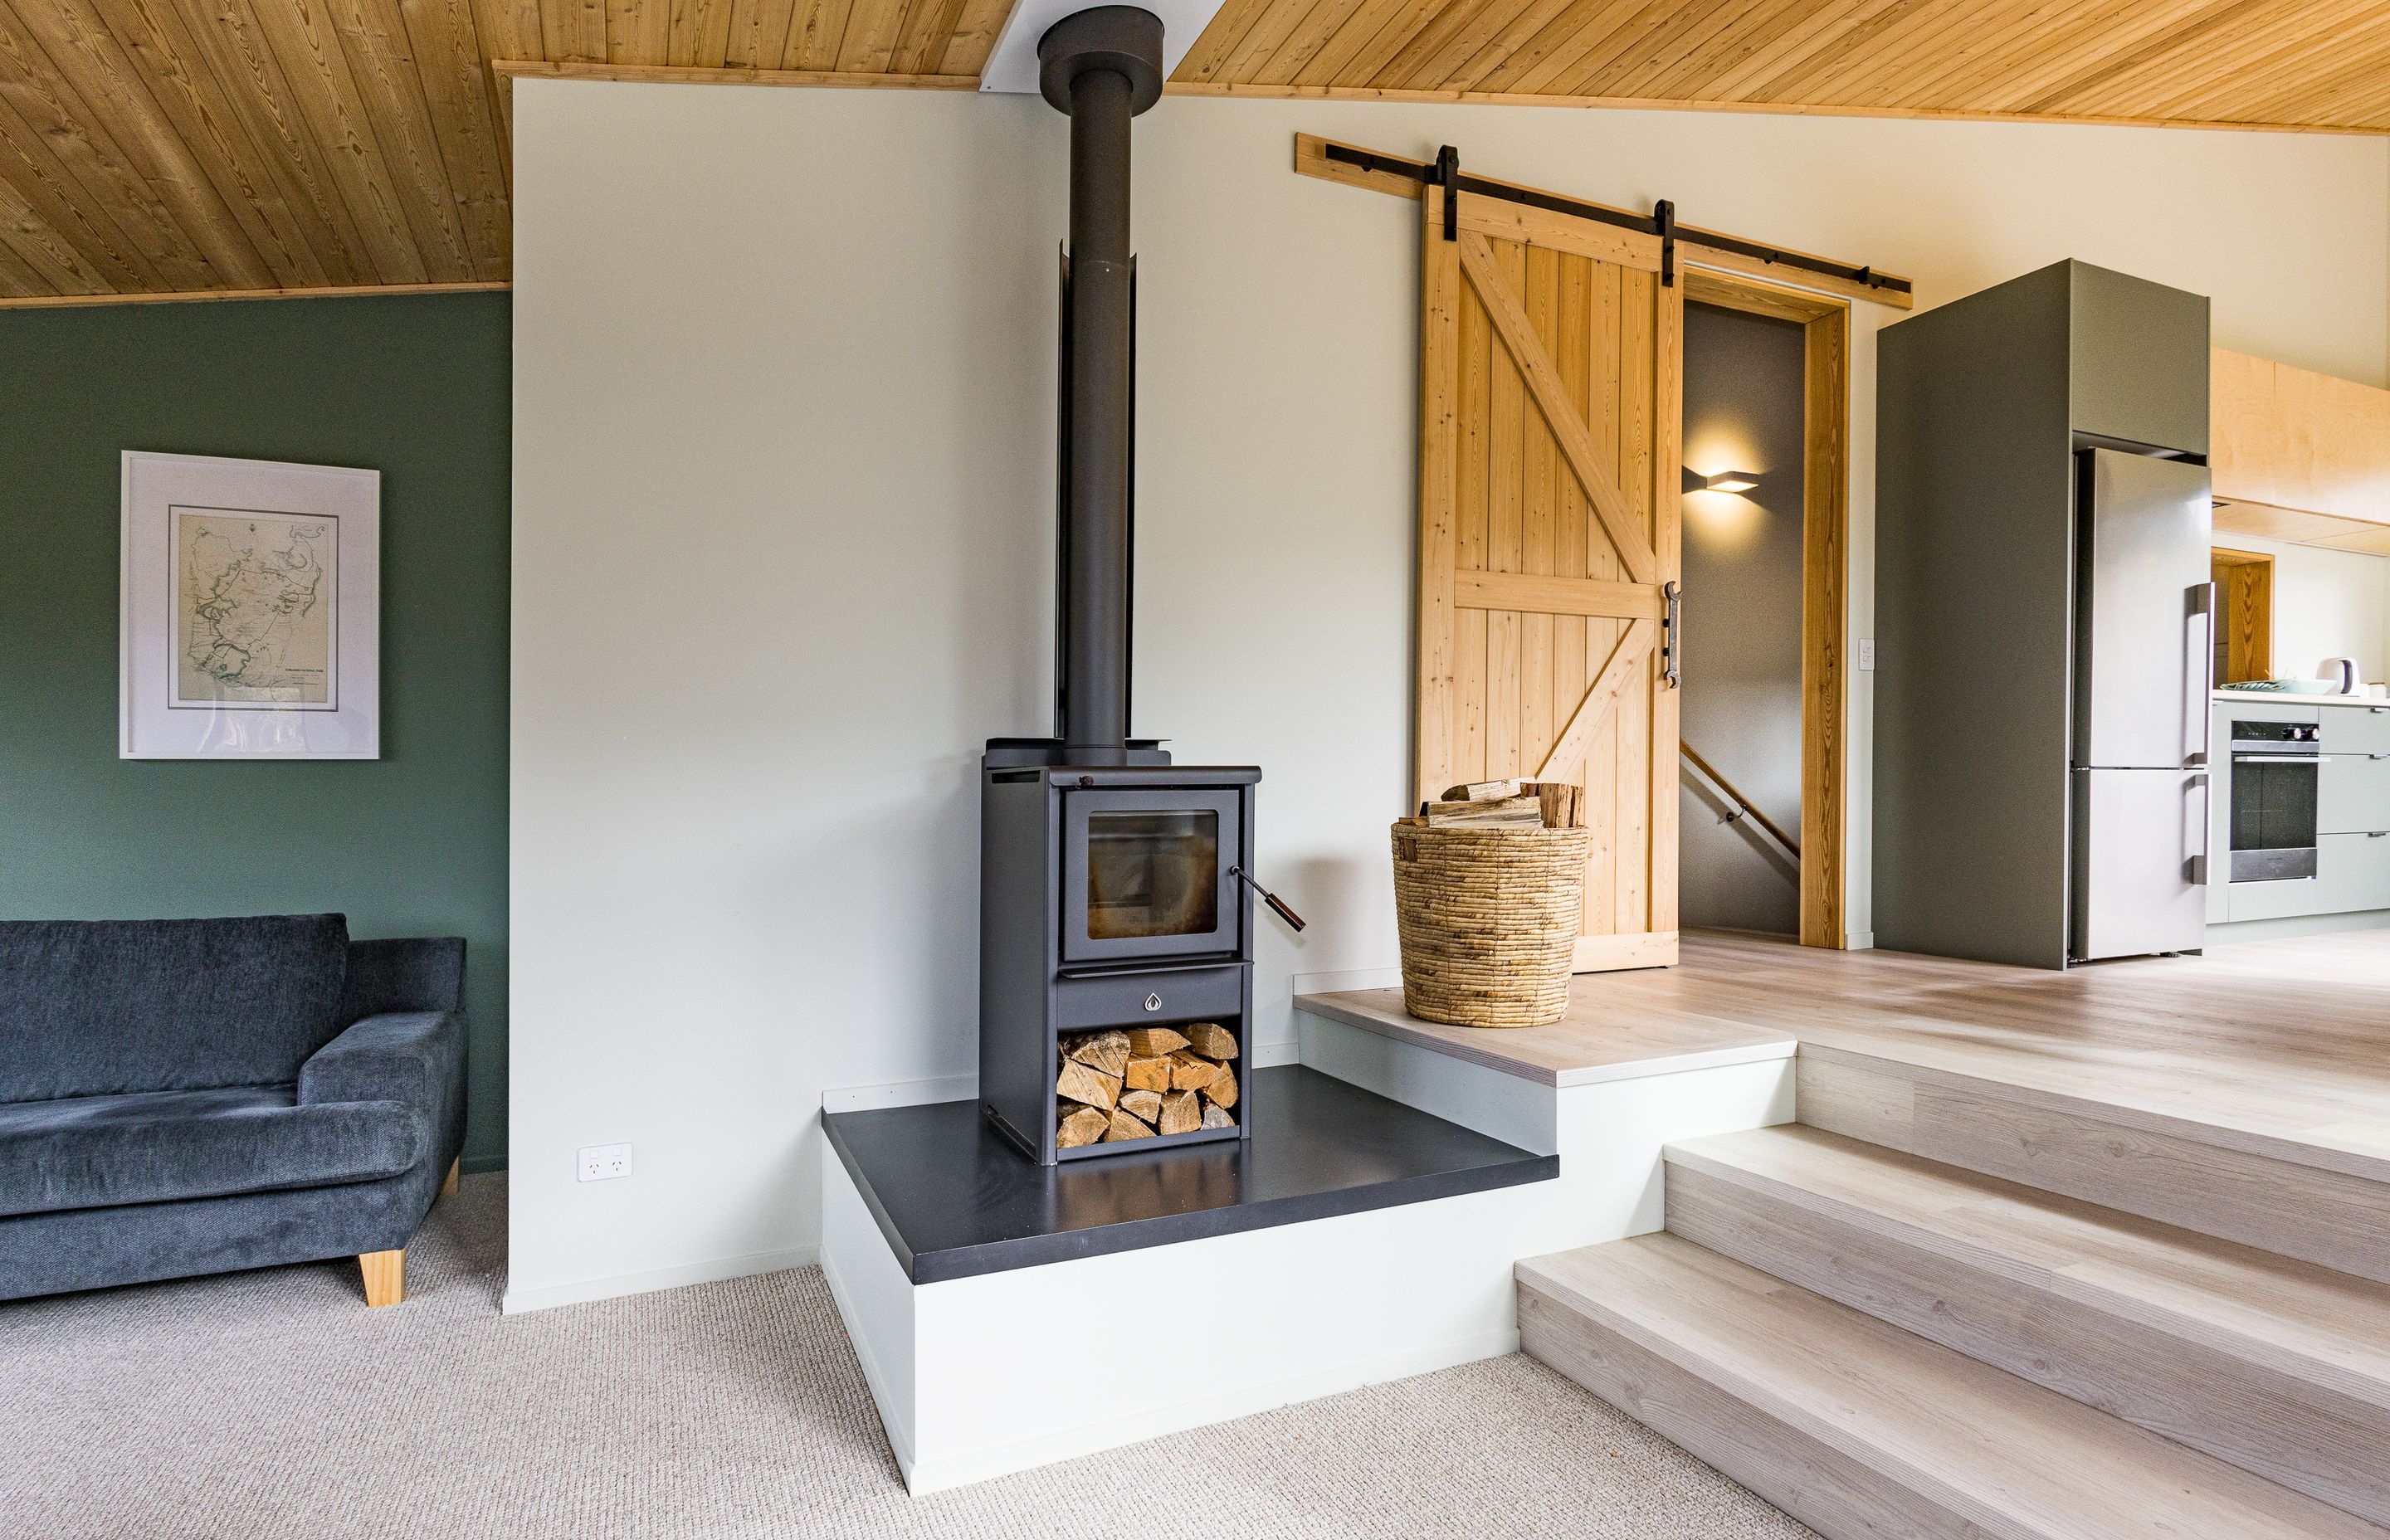 A wood burner adds ambience, and provides back-up heating.